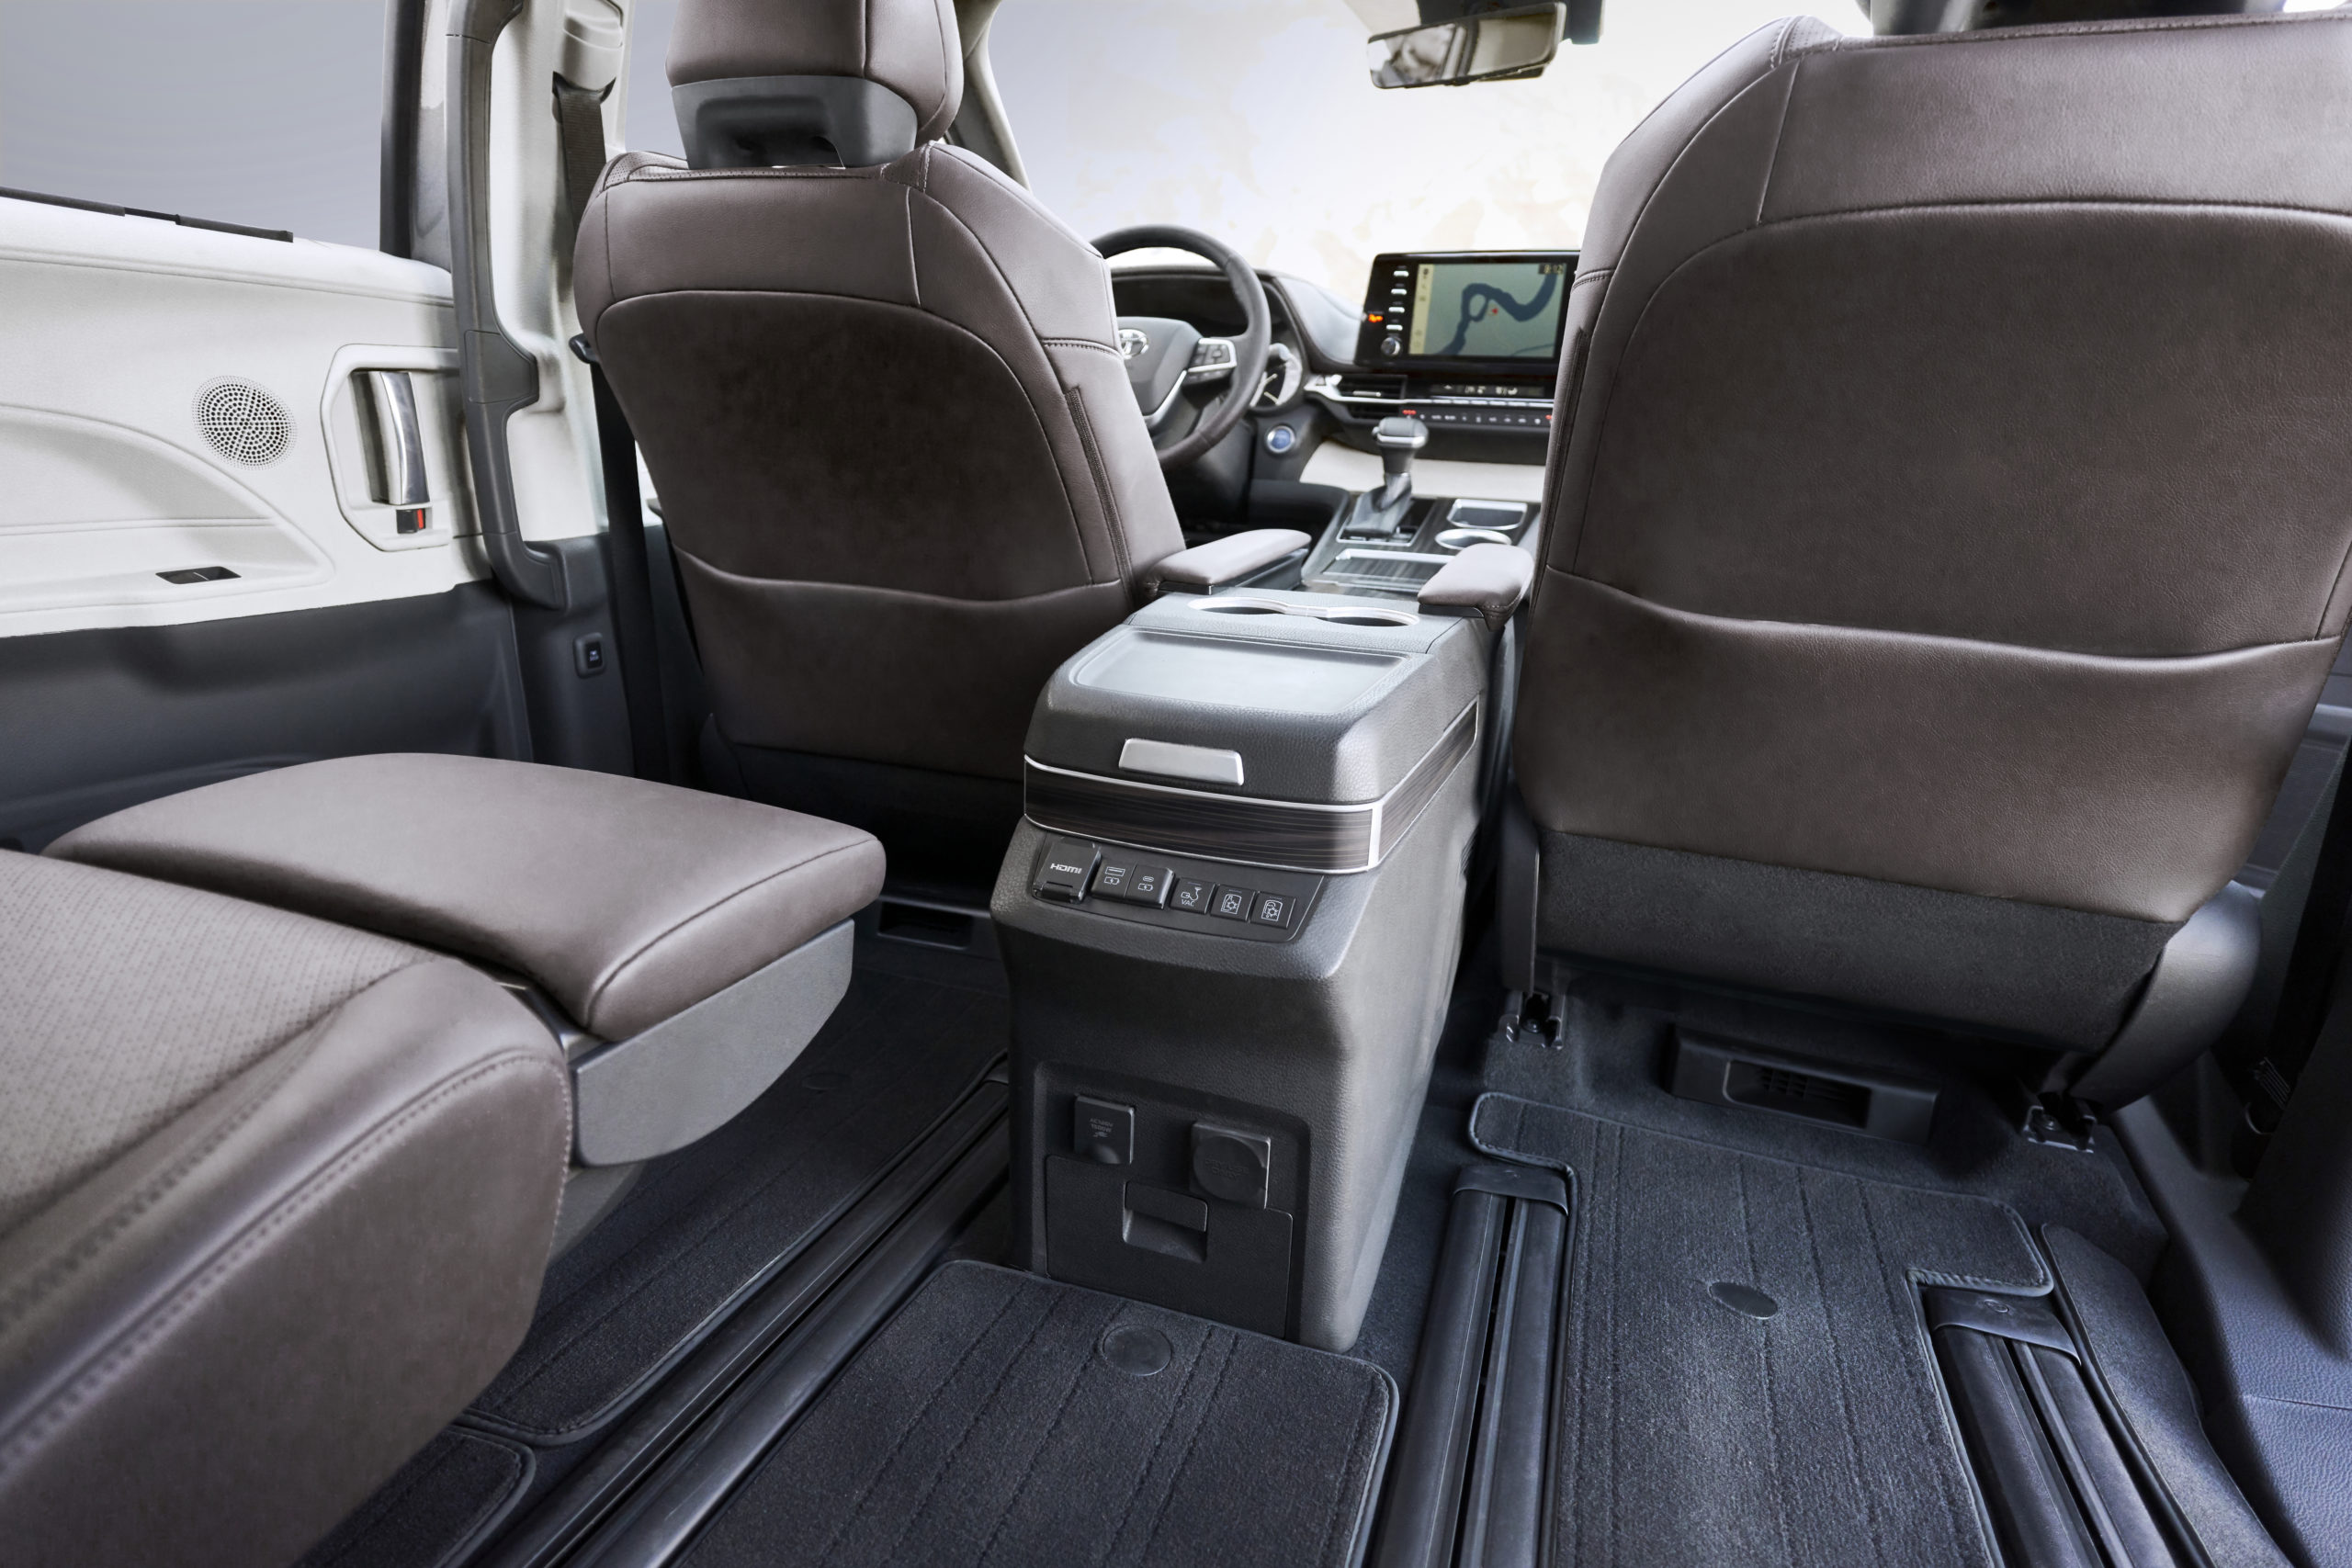 2021 Toyota Sienna features new body platform, more airbags, hybrid  powertrain